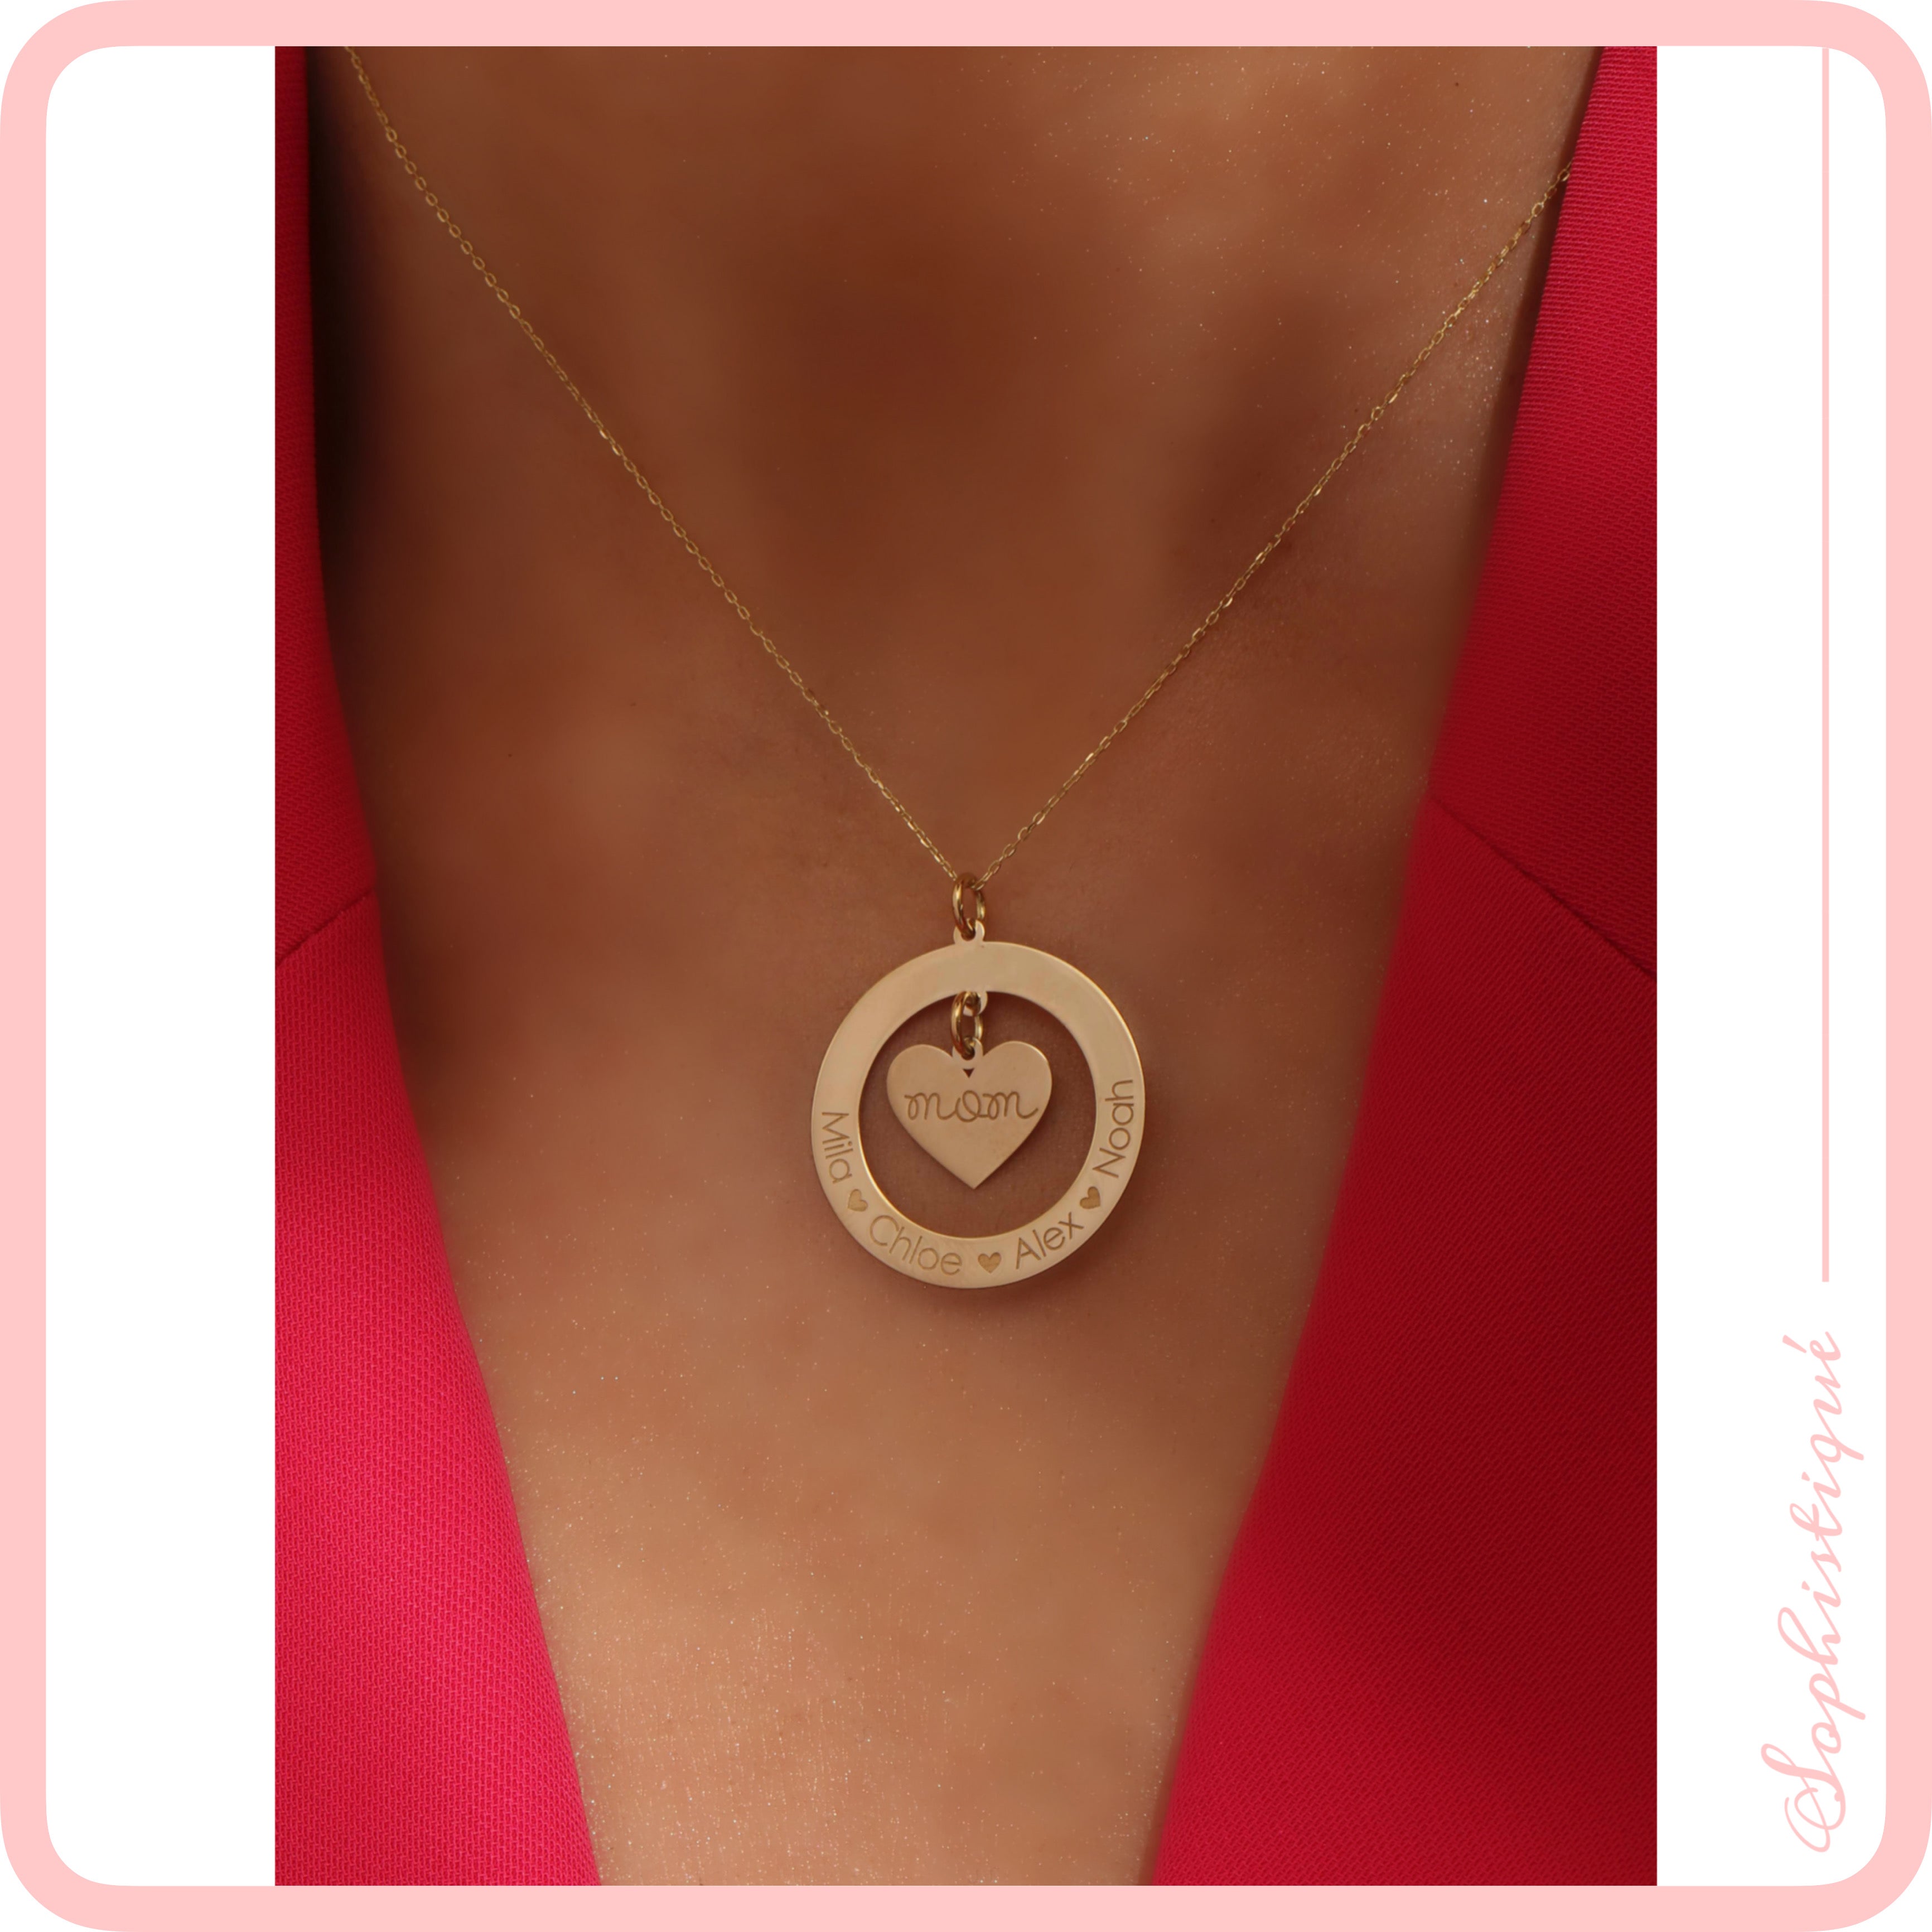 Mommy's Heart Necklace/Pendant